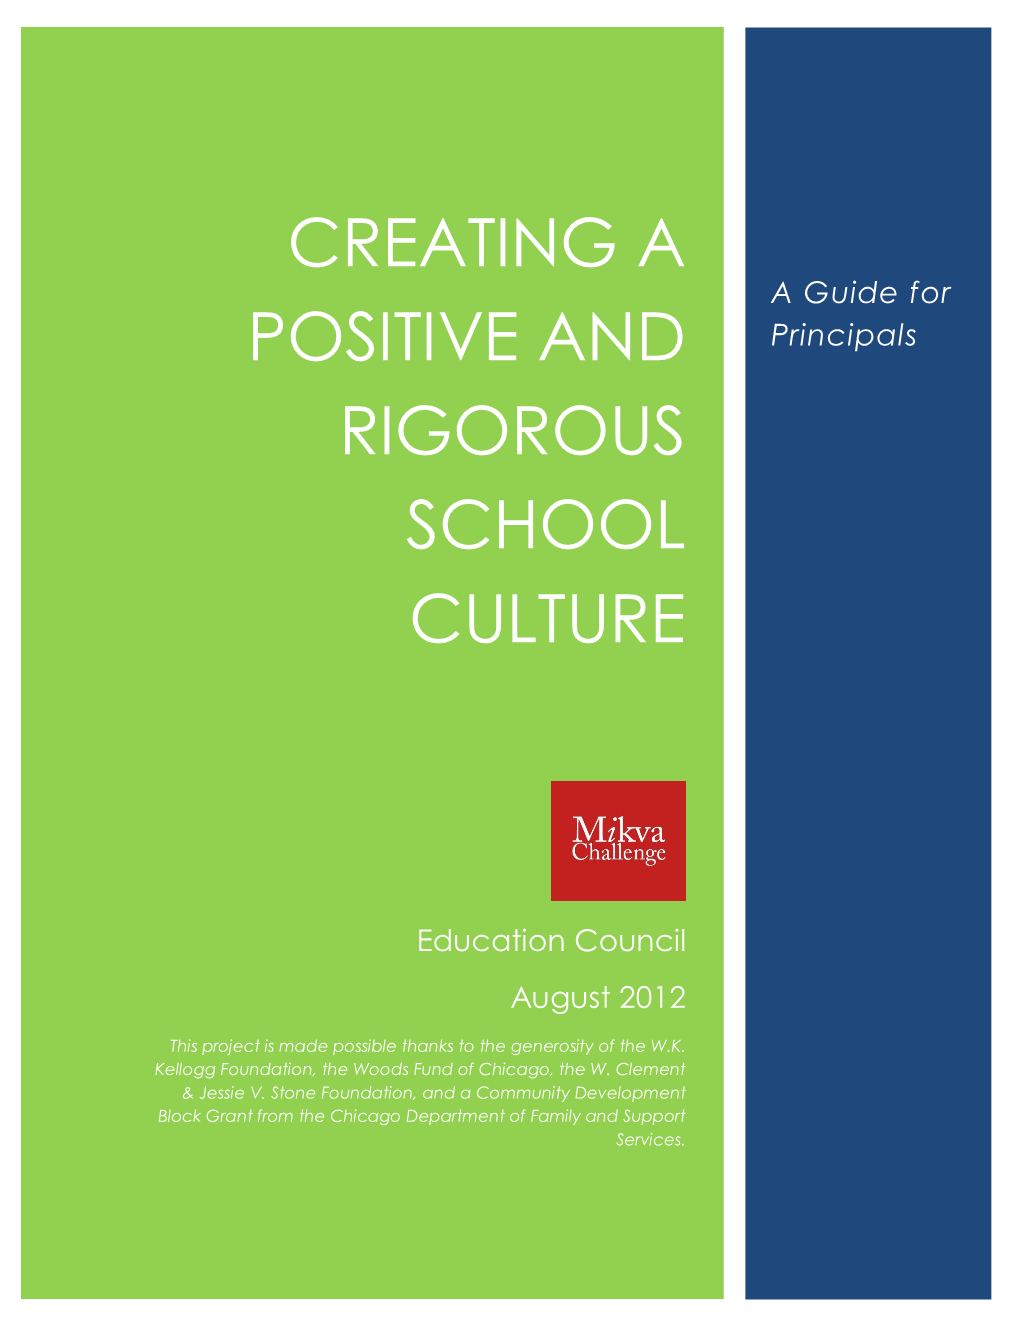 Creating a Positive and Rigorous School Culture: Culture: School Rigorous and Positive a Creating 1